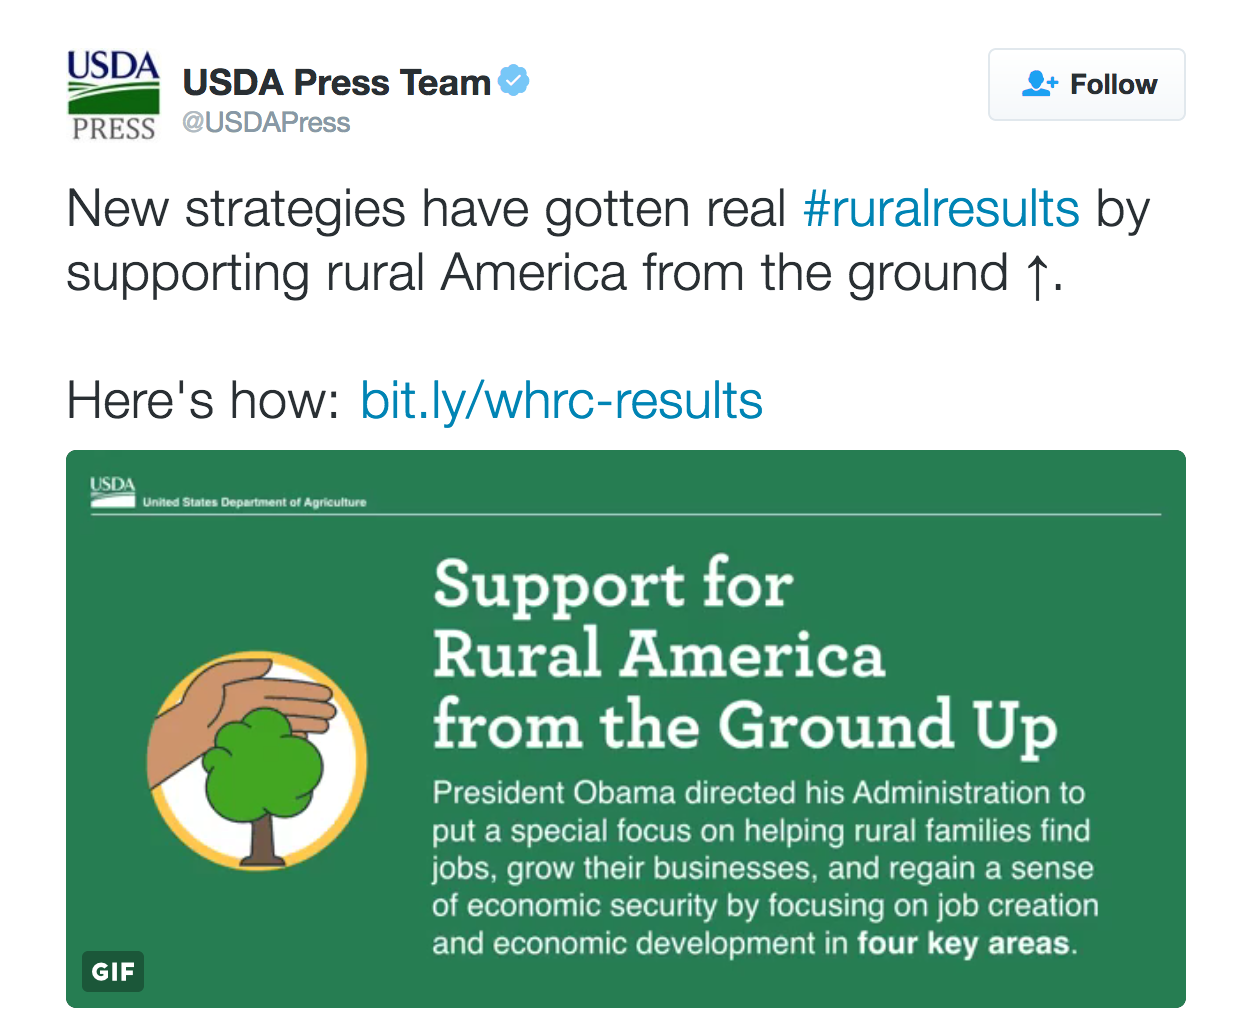 New strategies have gotten real #ruralresults by supporting rural America from the ground ↑. Here's how: http://bit.ly/whrc-results